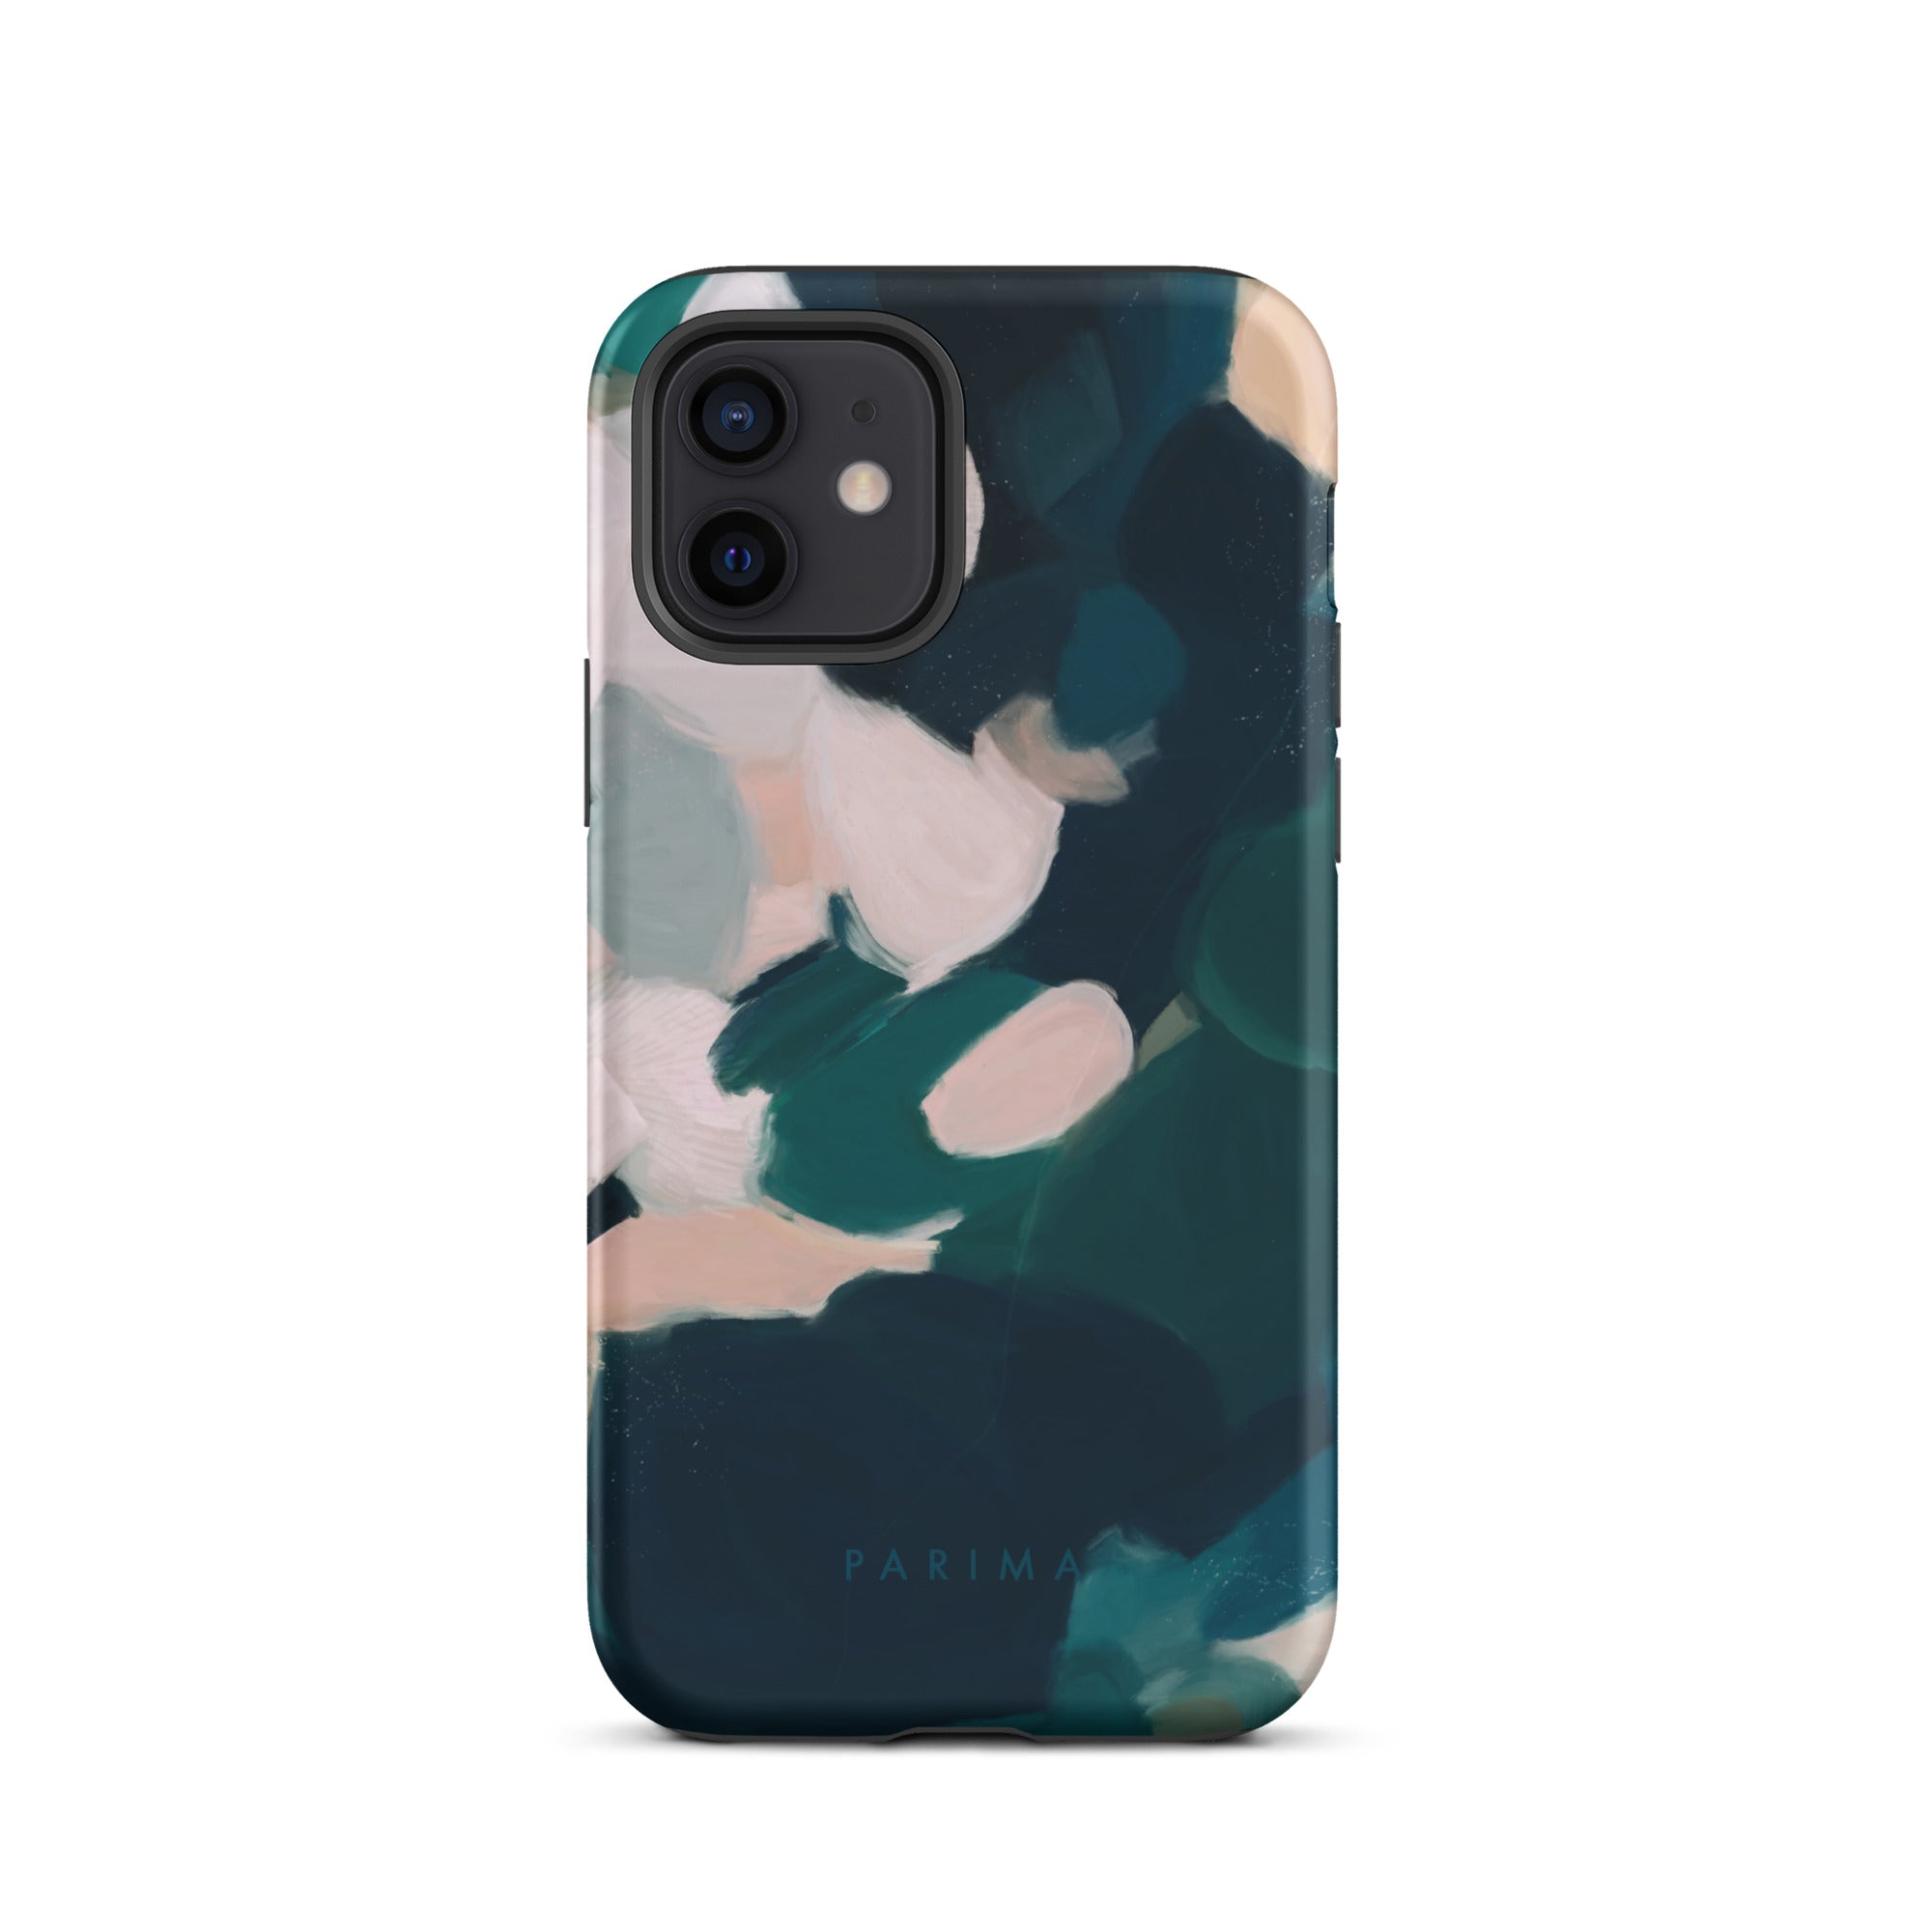 Aerwyn, green and pink abstract art - iPhone 12 tough case by Parima Studio